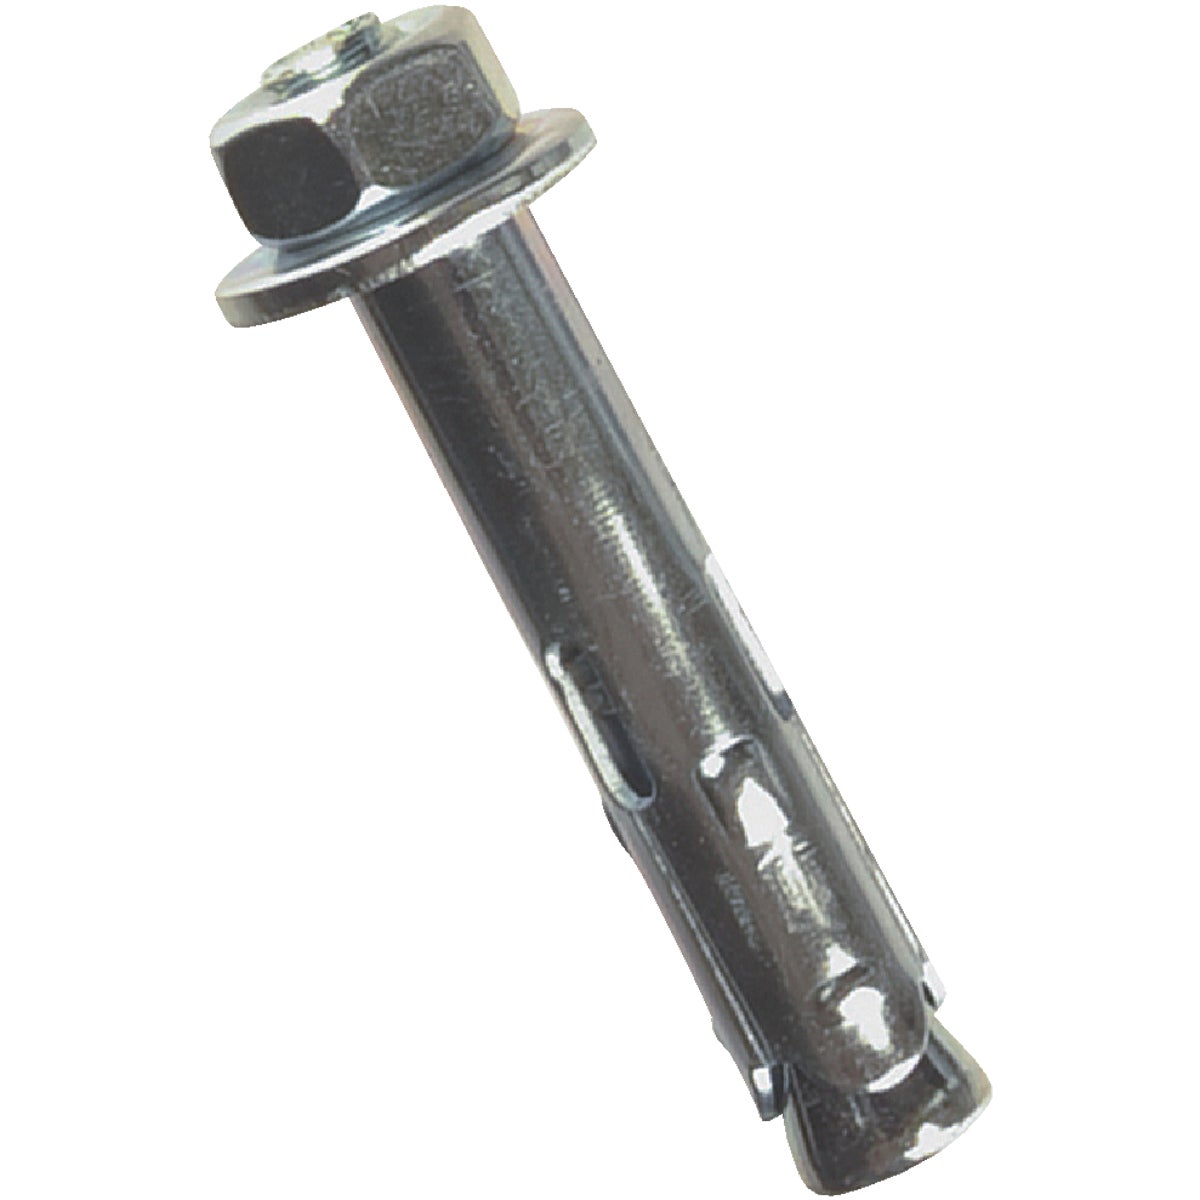 Red Head 5/16 In. x 1-1/2 In. Sleeve Stud Bolt Anchor